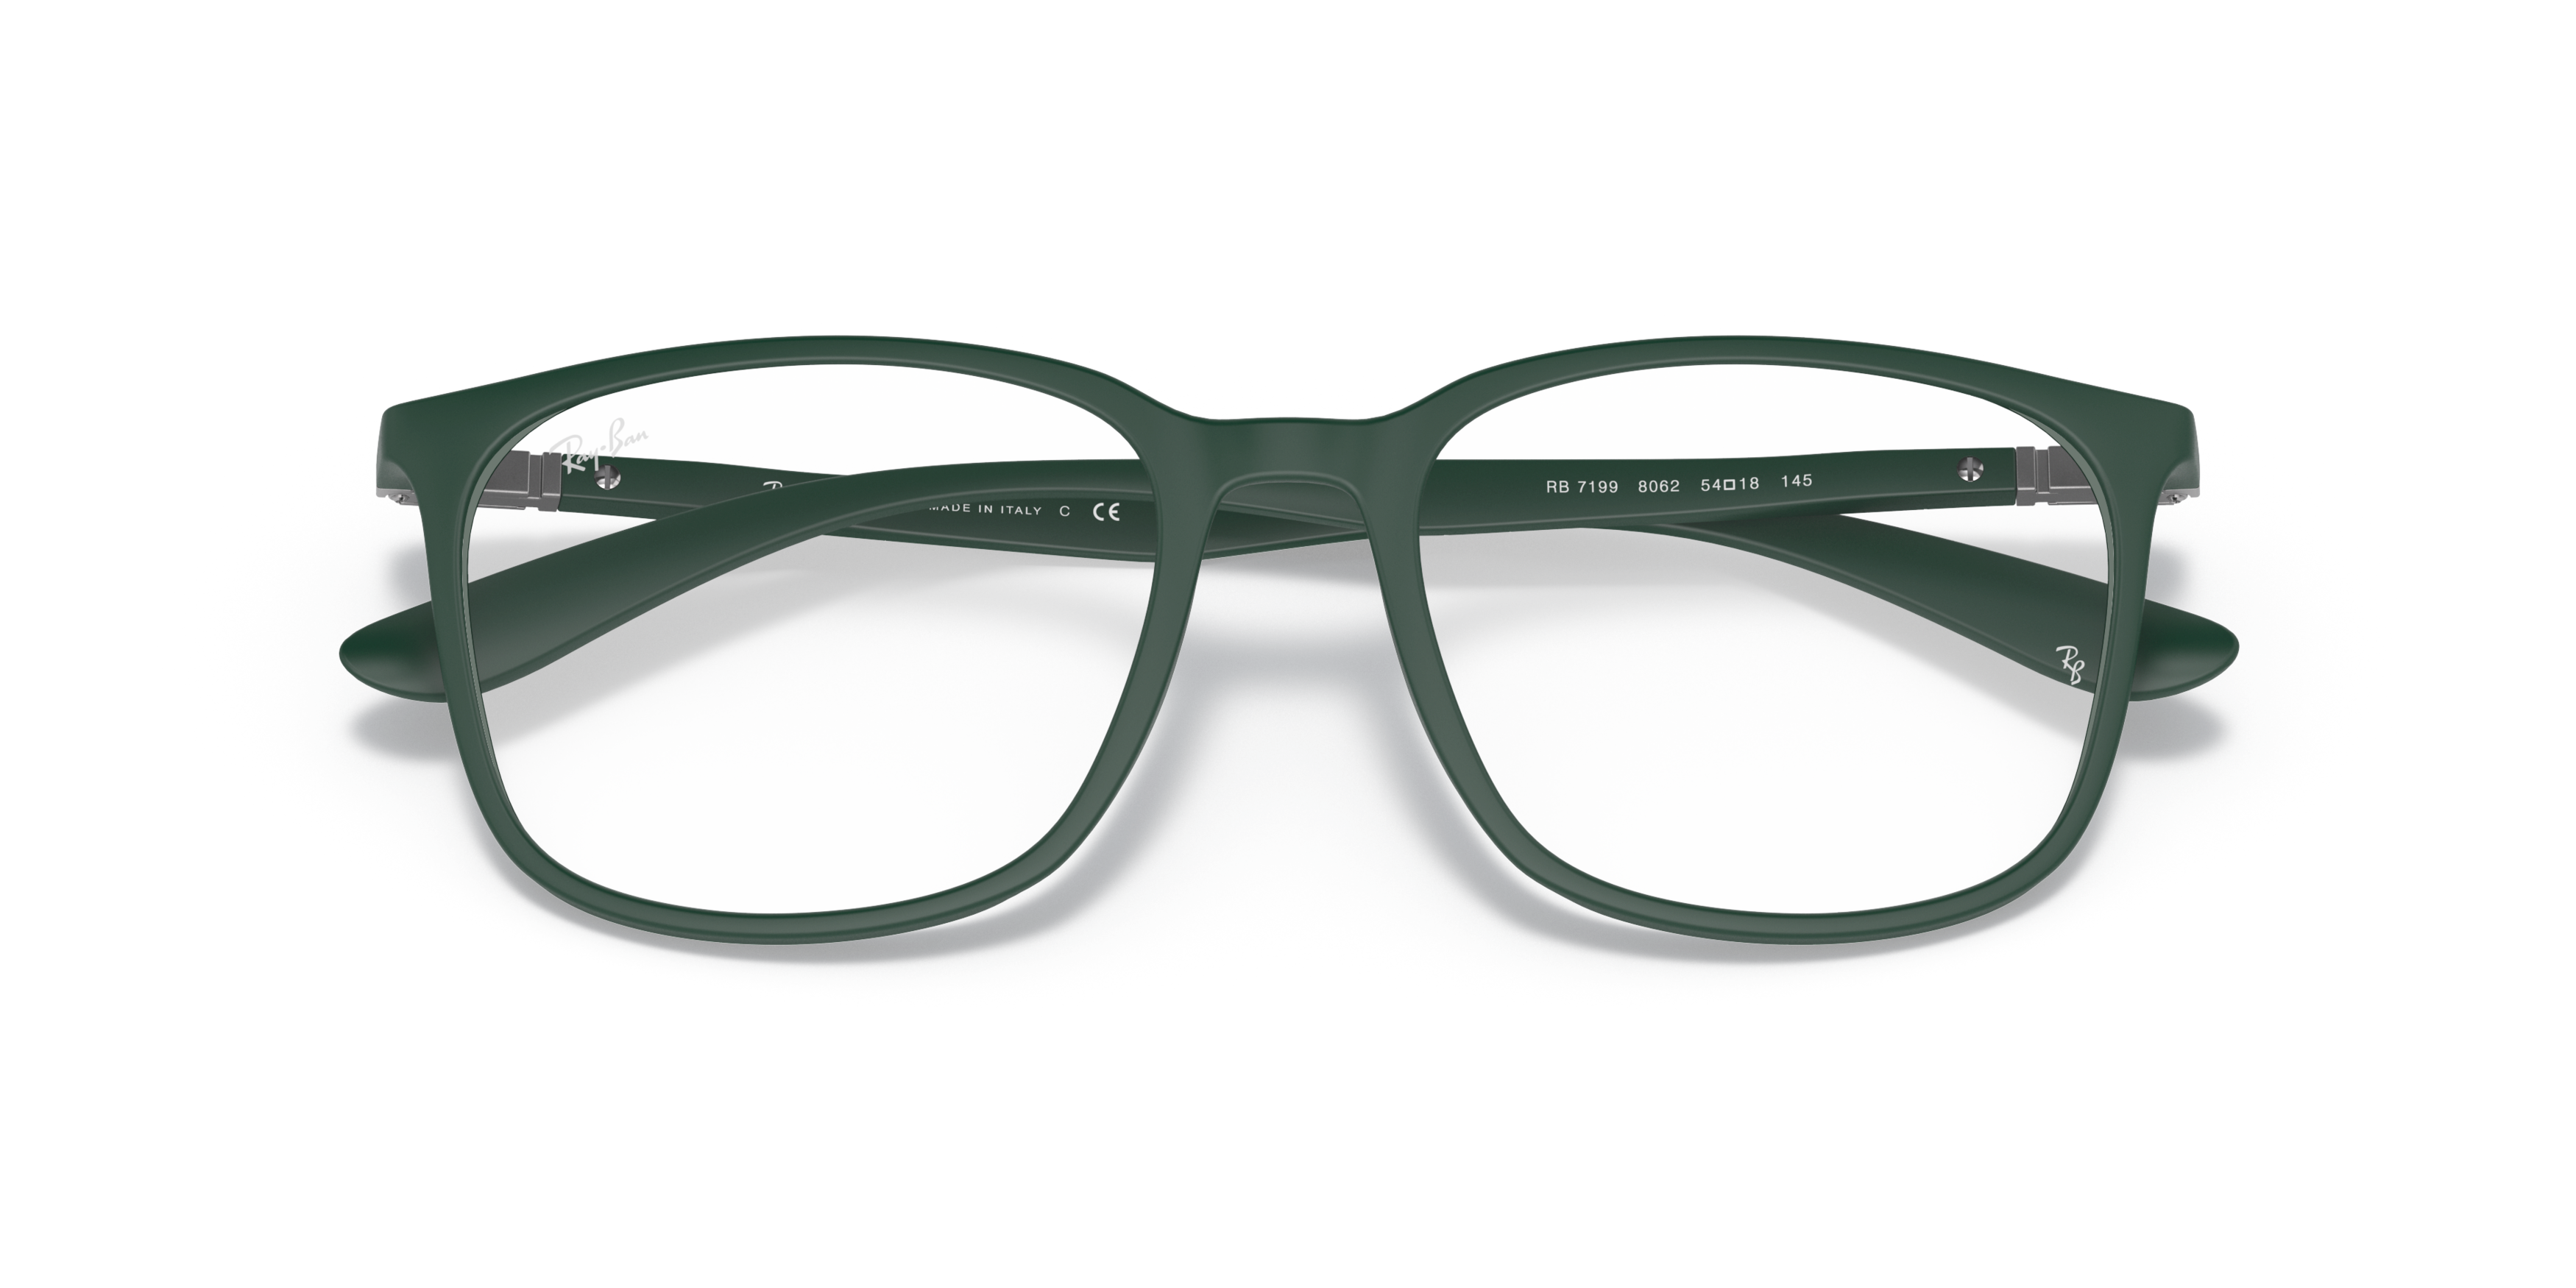 Folded Ray-Ban RX 7199 (8062) Glasses Transparent / Green